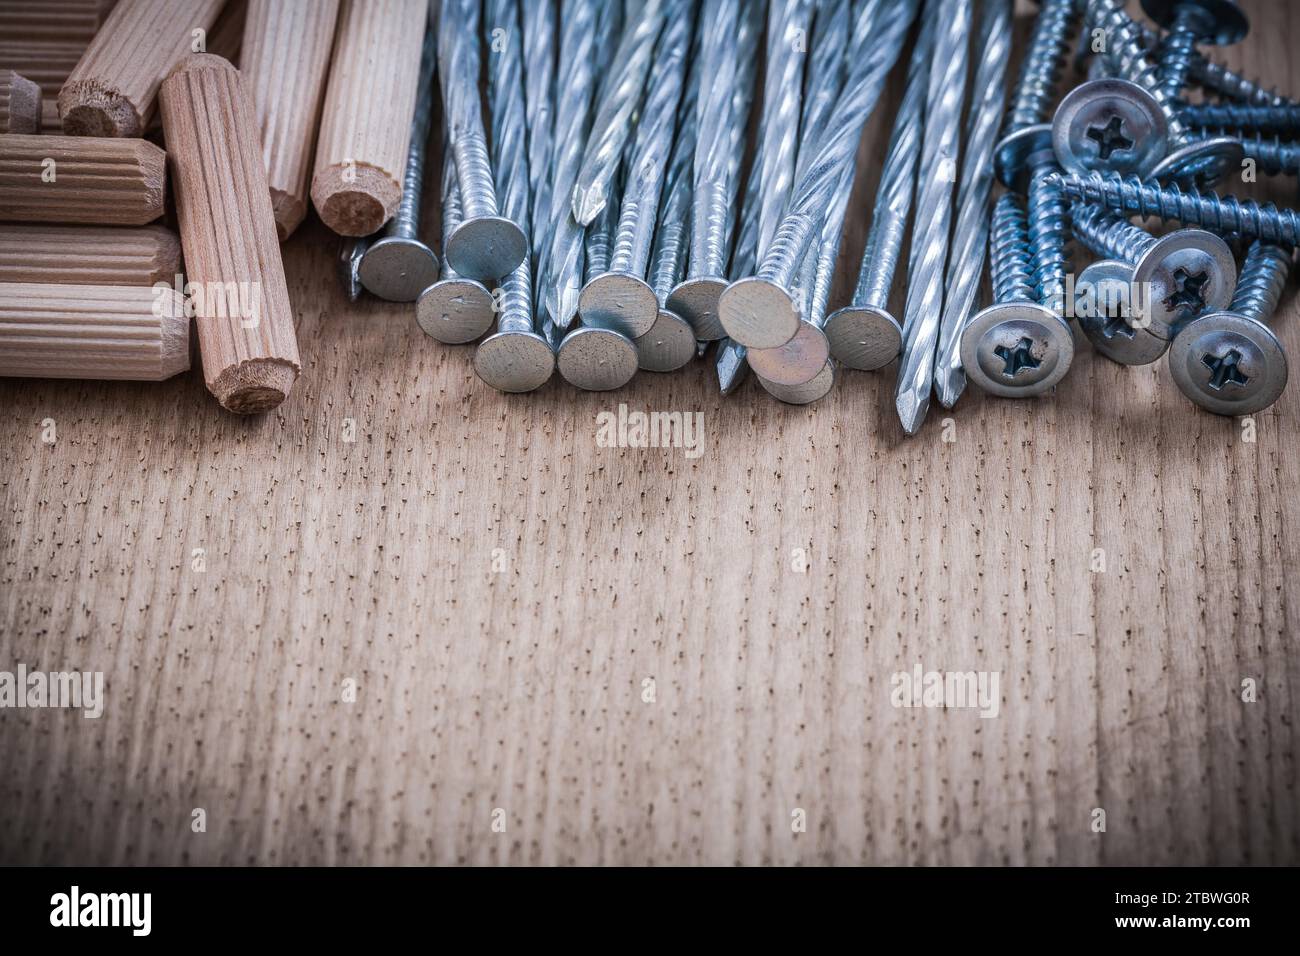 Variety of woodworking dowels and construction nails copy space image Stock Photo